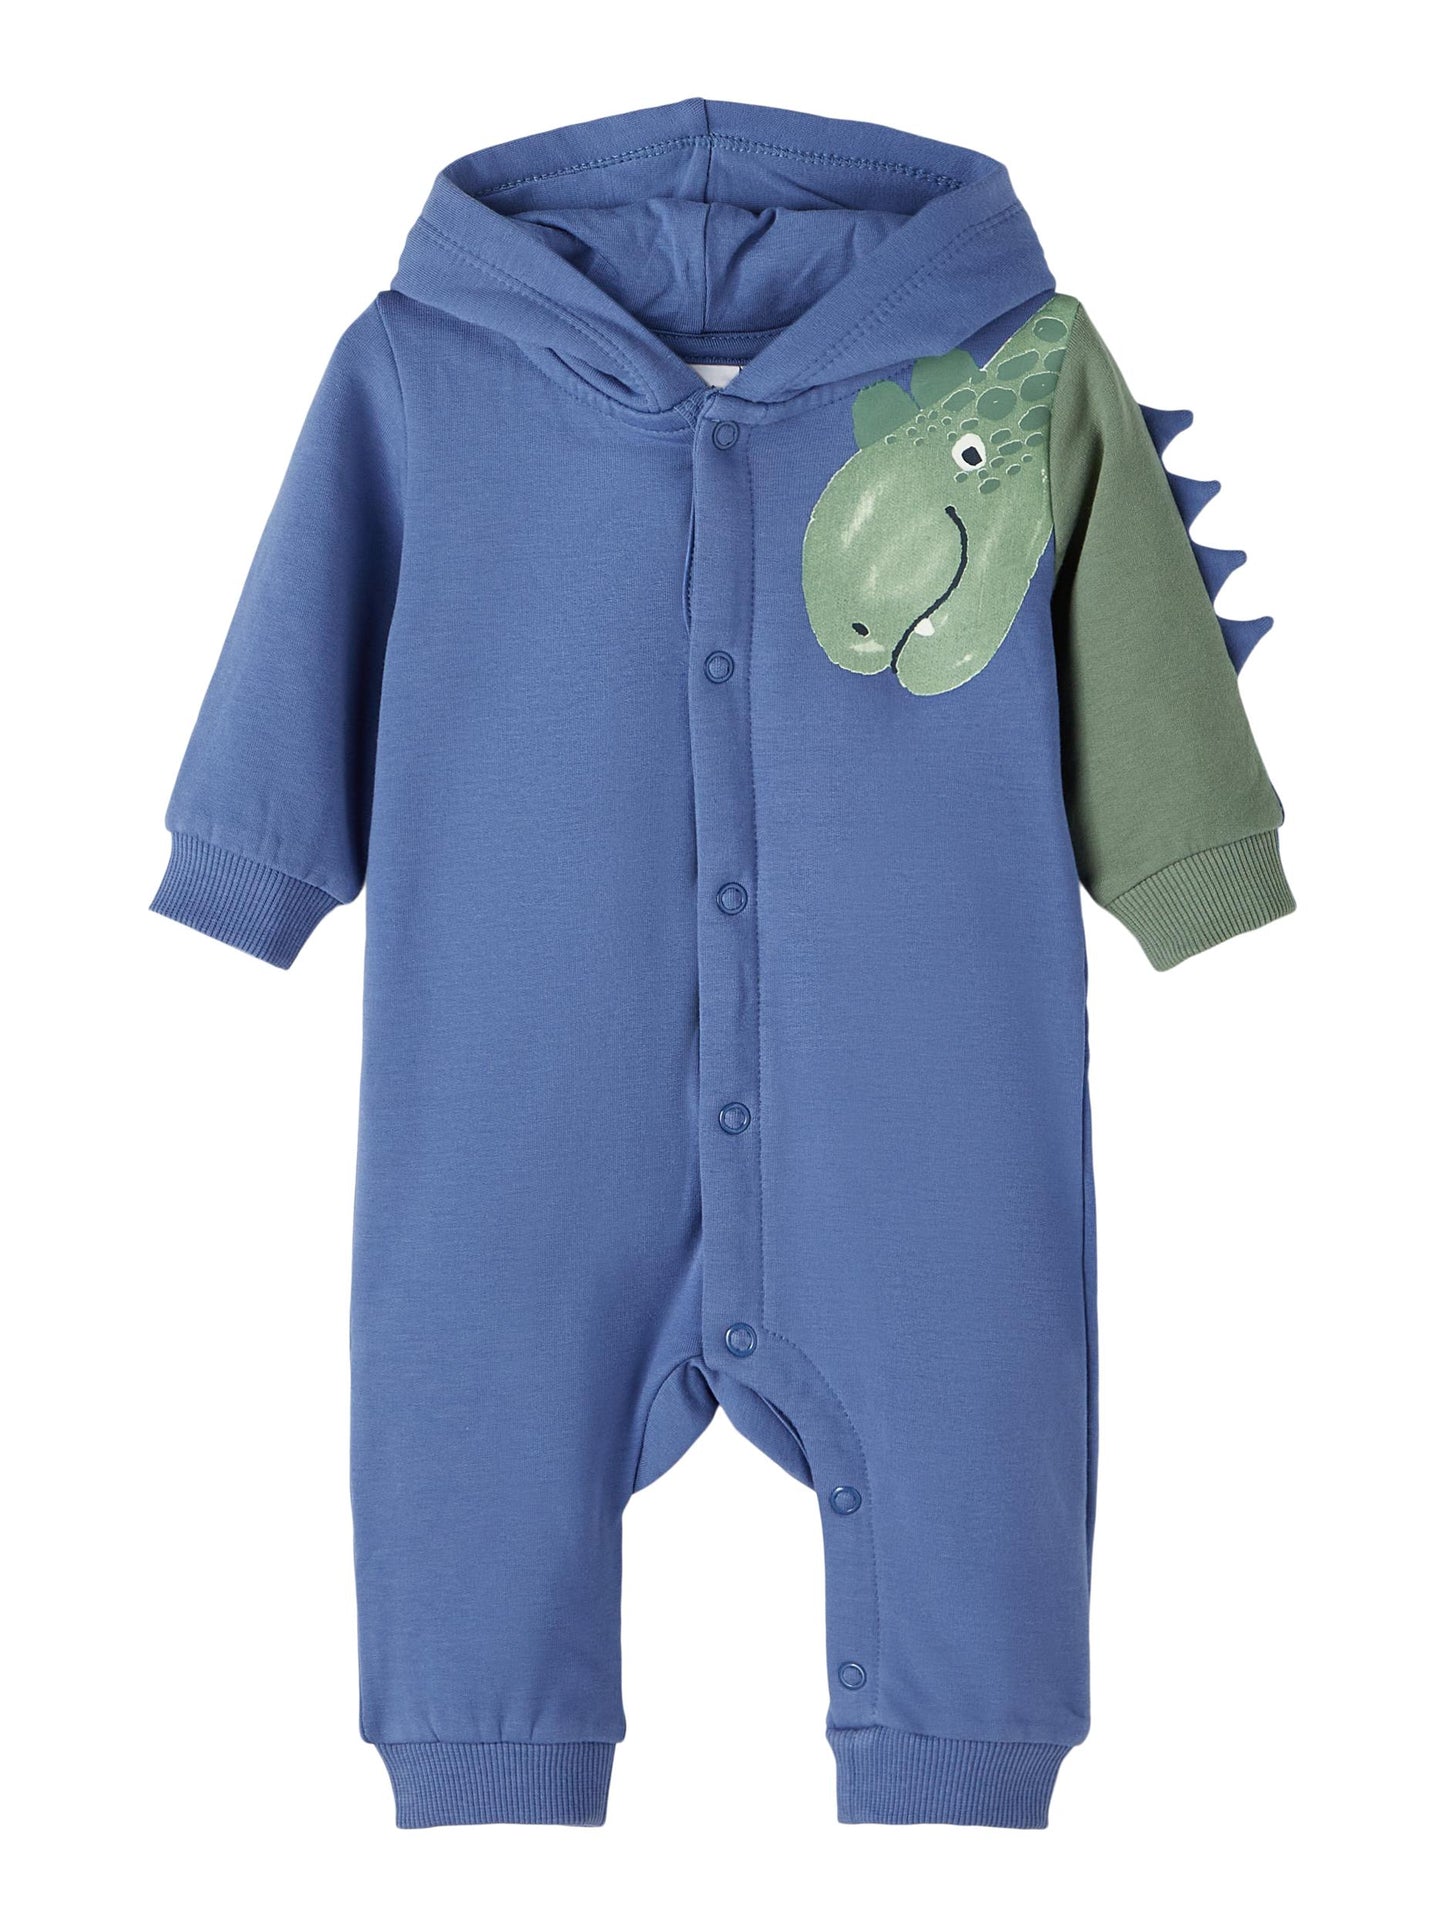 Dino onepiece baby